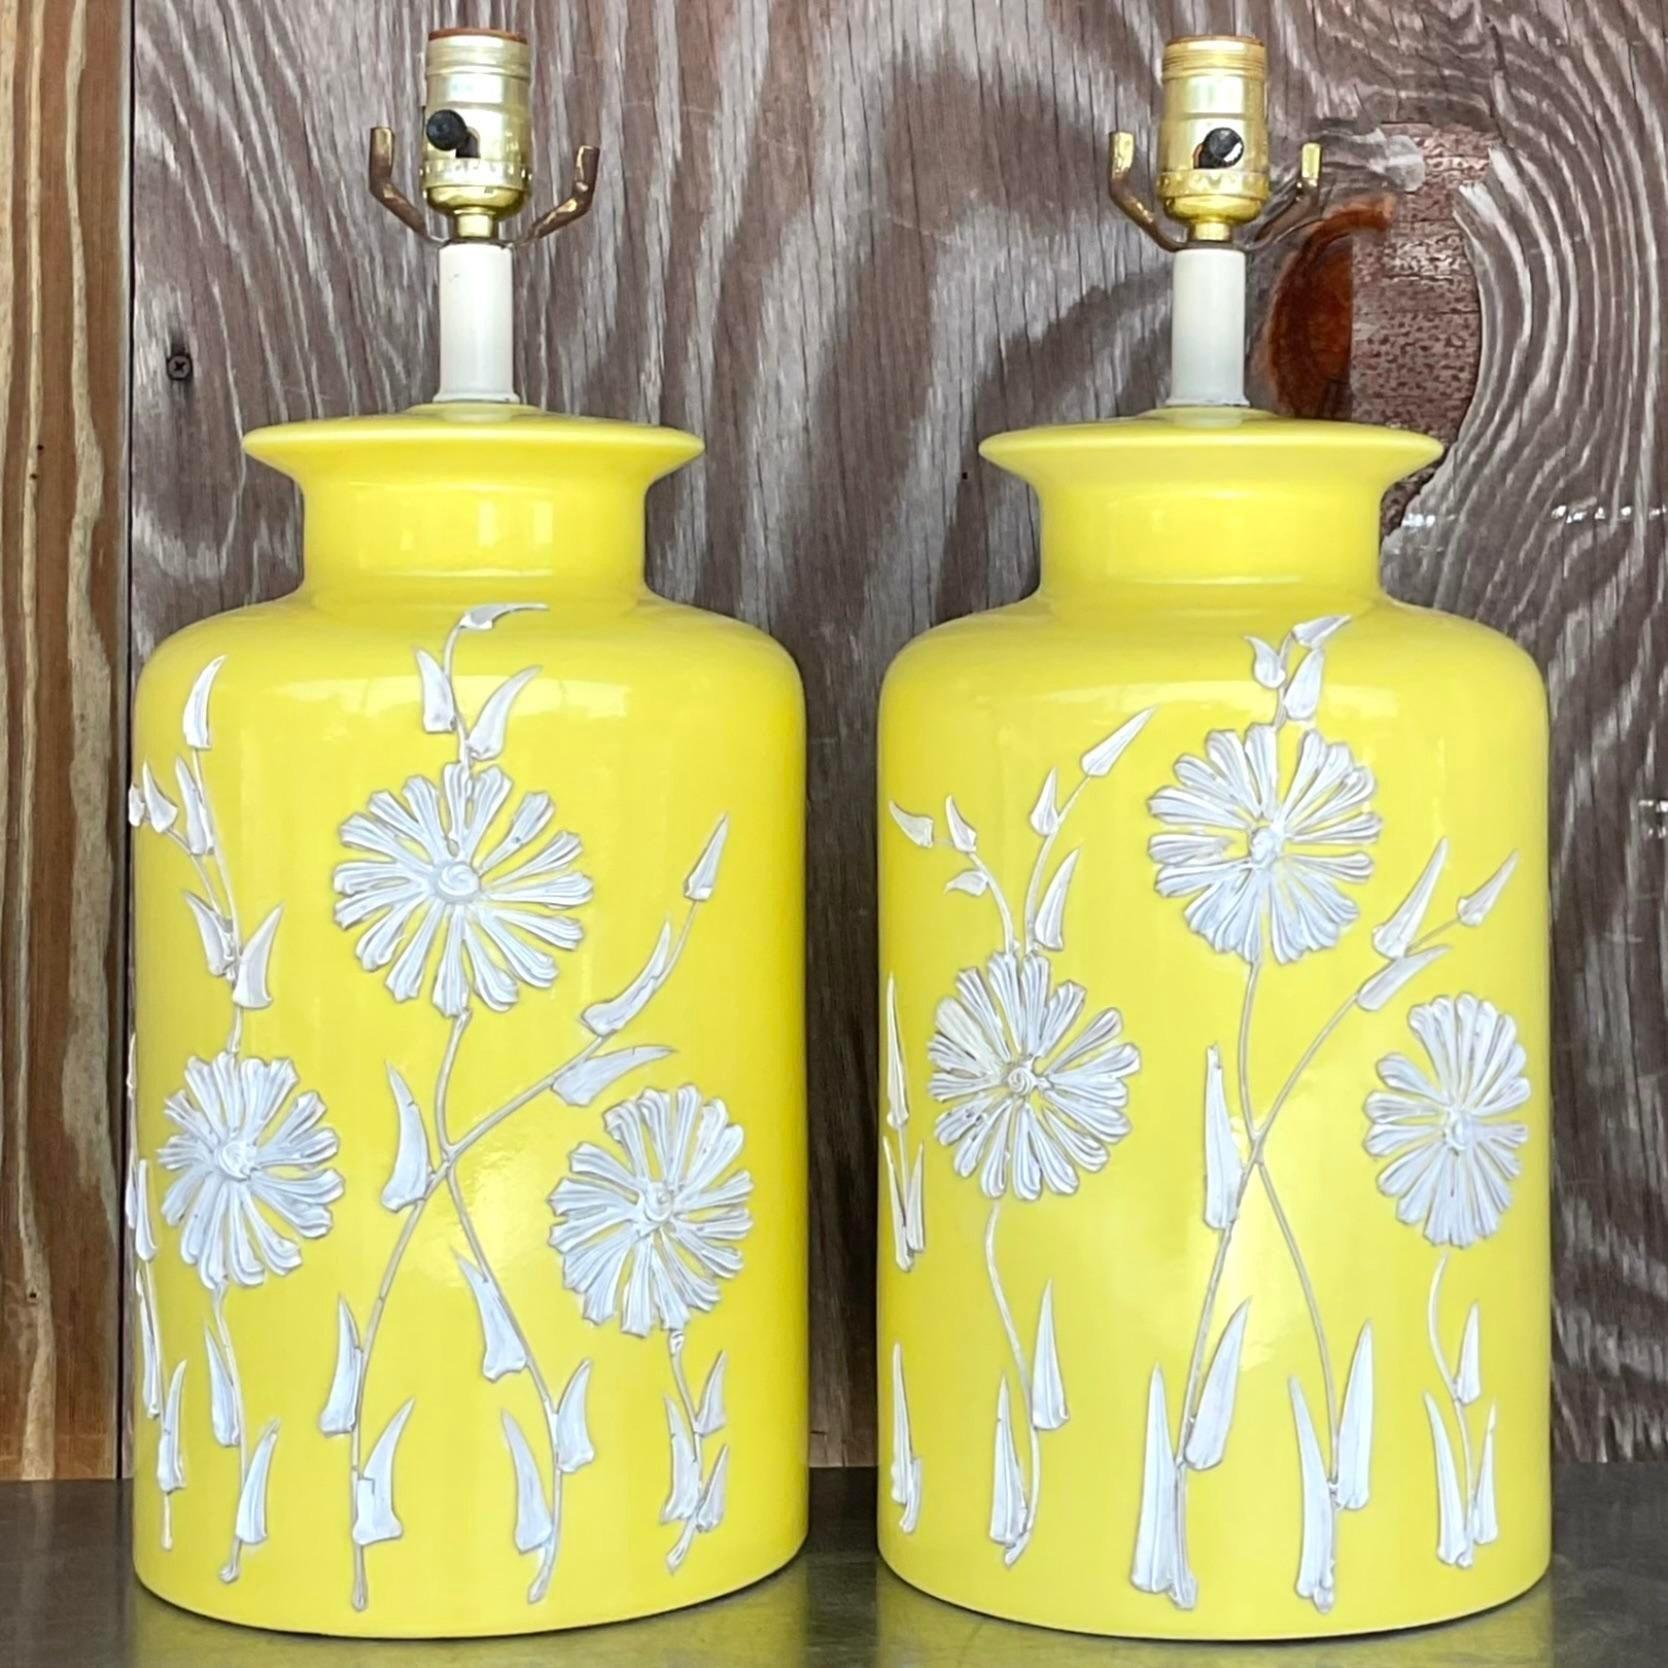 A fabulous pair of vintage Boho table lamps. A brilliant yellow glazed ceramic with a floral icing design. Acquired from a Palm Beach estate.